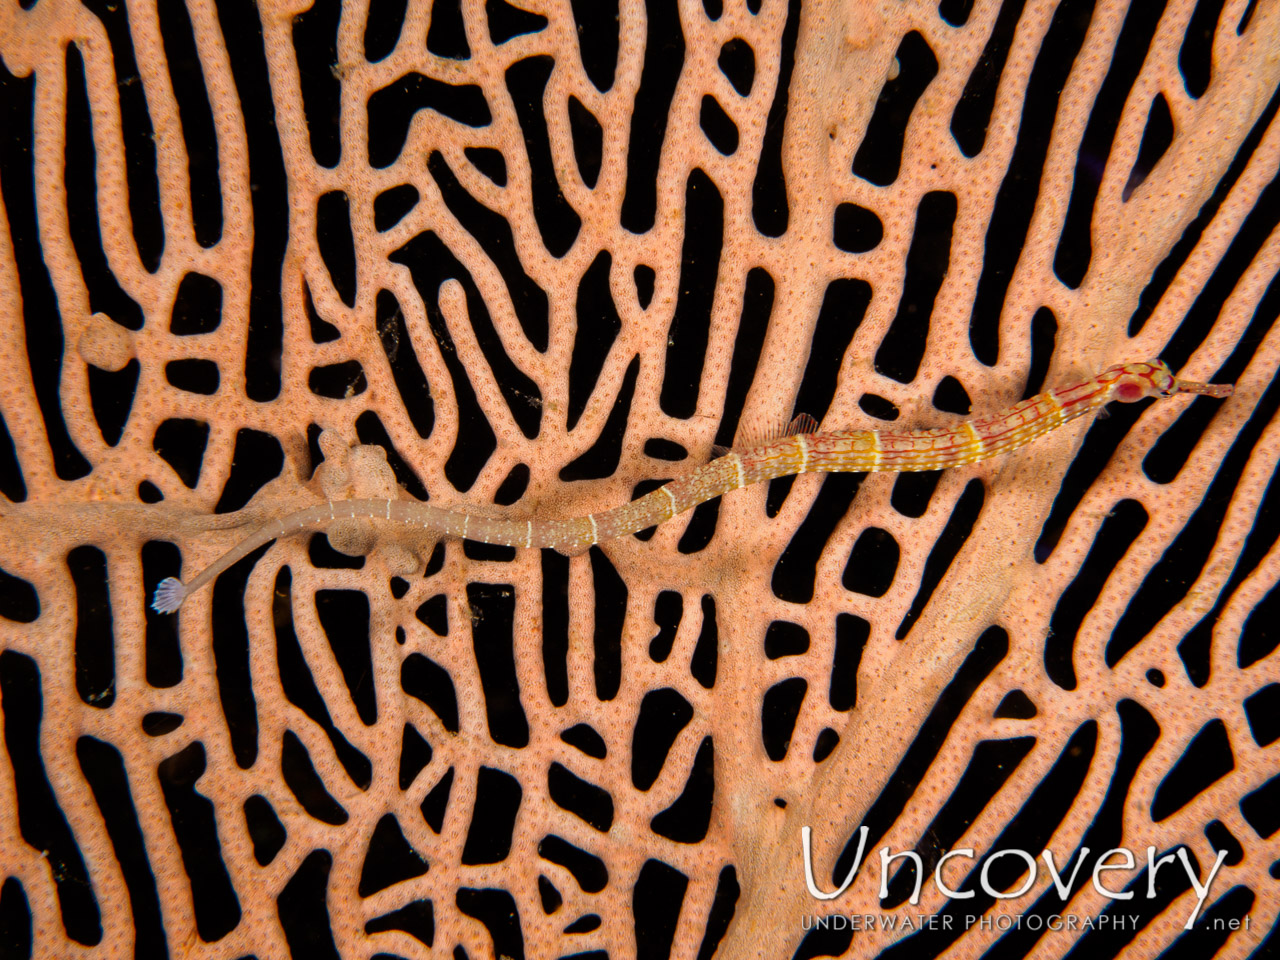 Pipefish, photo taken in Maldives, Male Atoll, South Male Atoll, Out Wreck